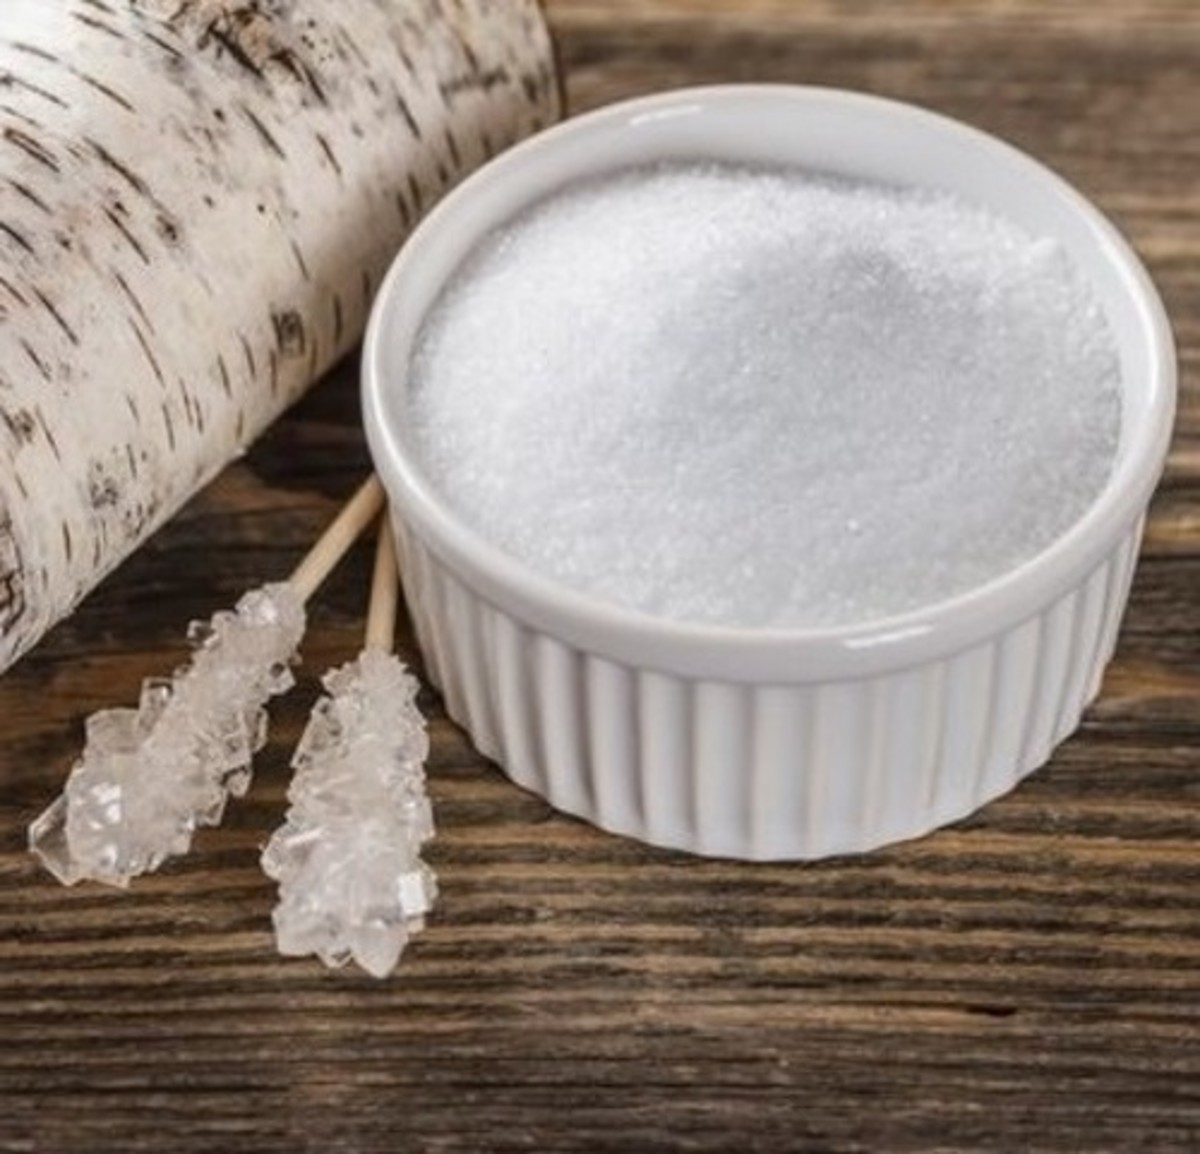 Xylitol is a non-fermentable sugar alcohol that has Glycemic Index of 7